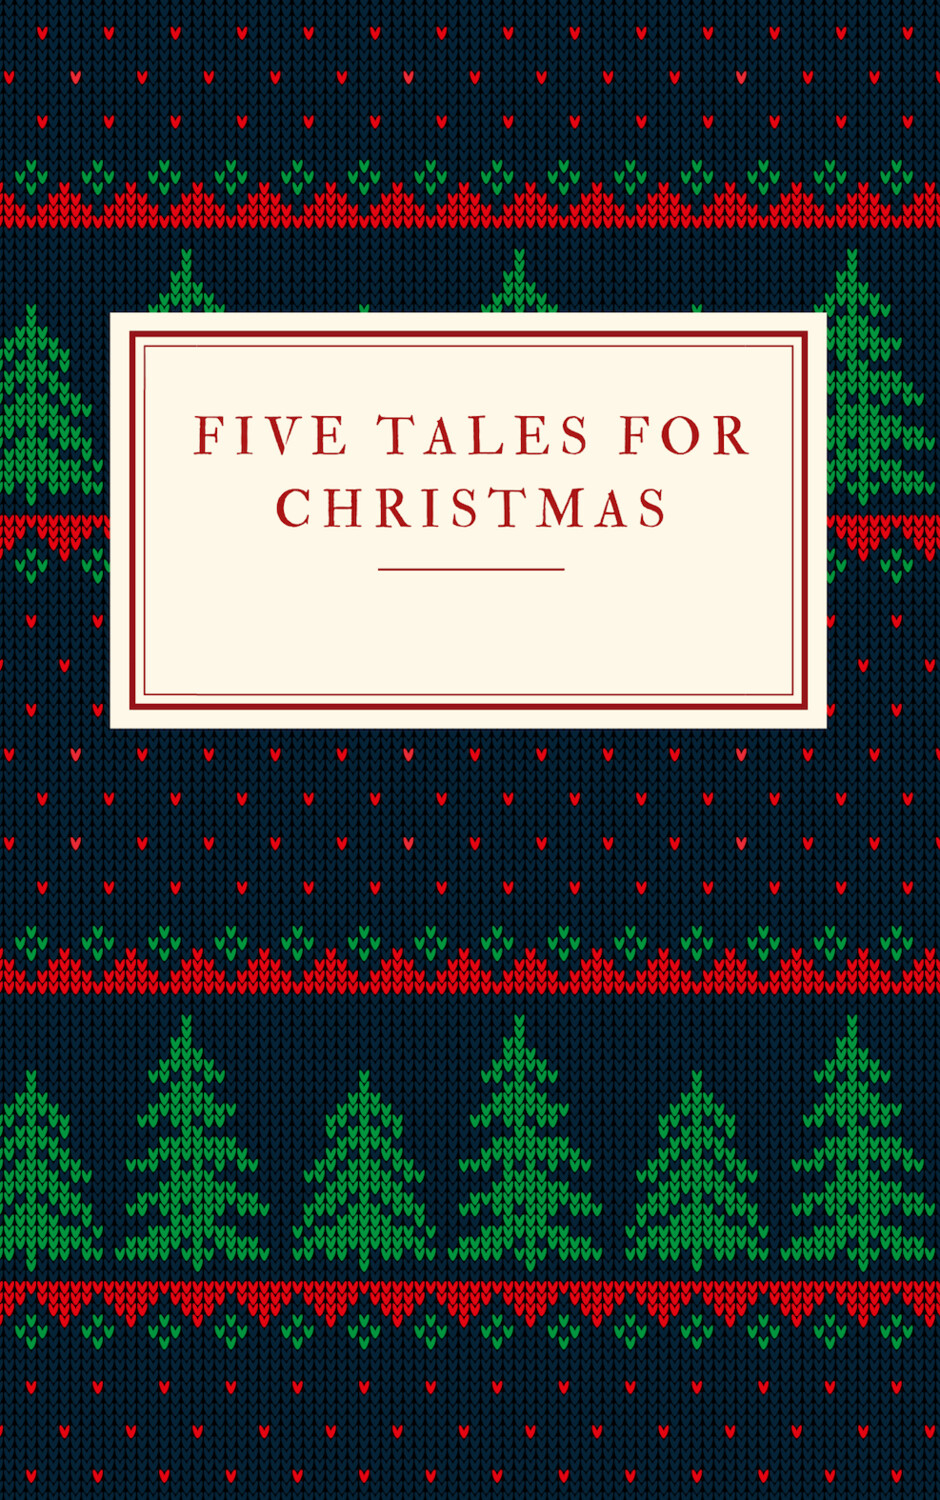 Five Christmas Tales